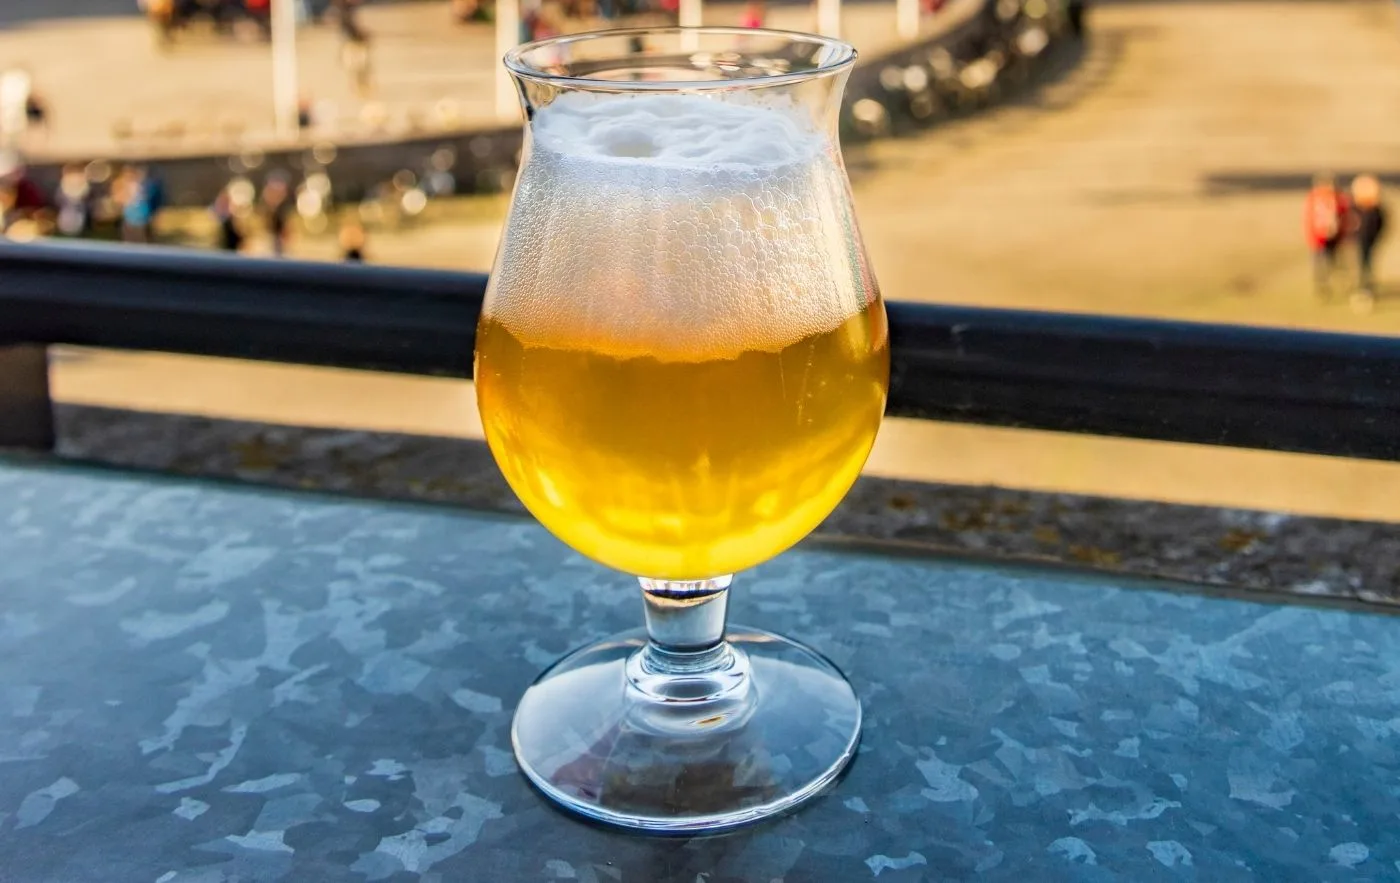 Light Belgian ale in a glass on a table.